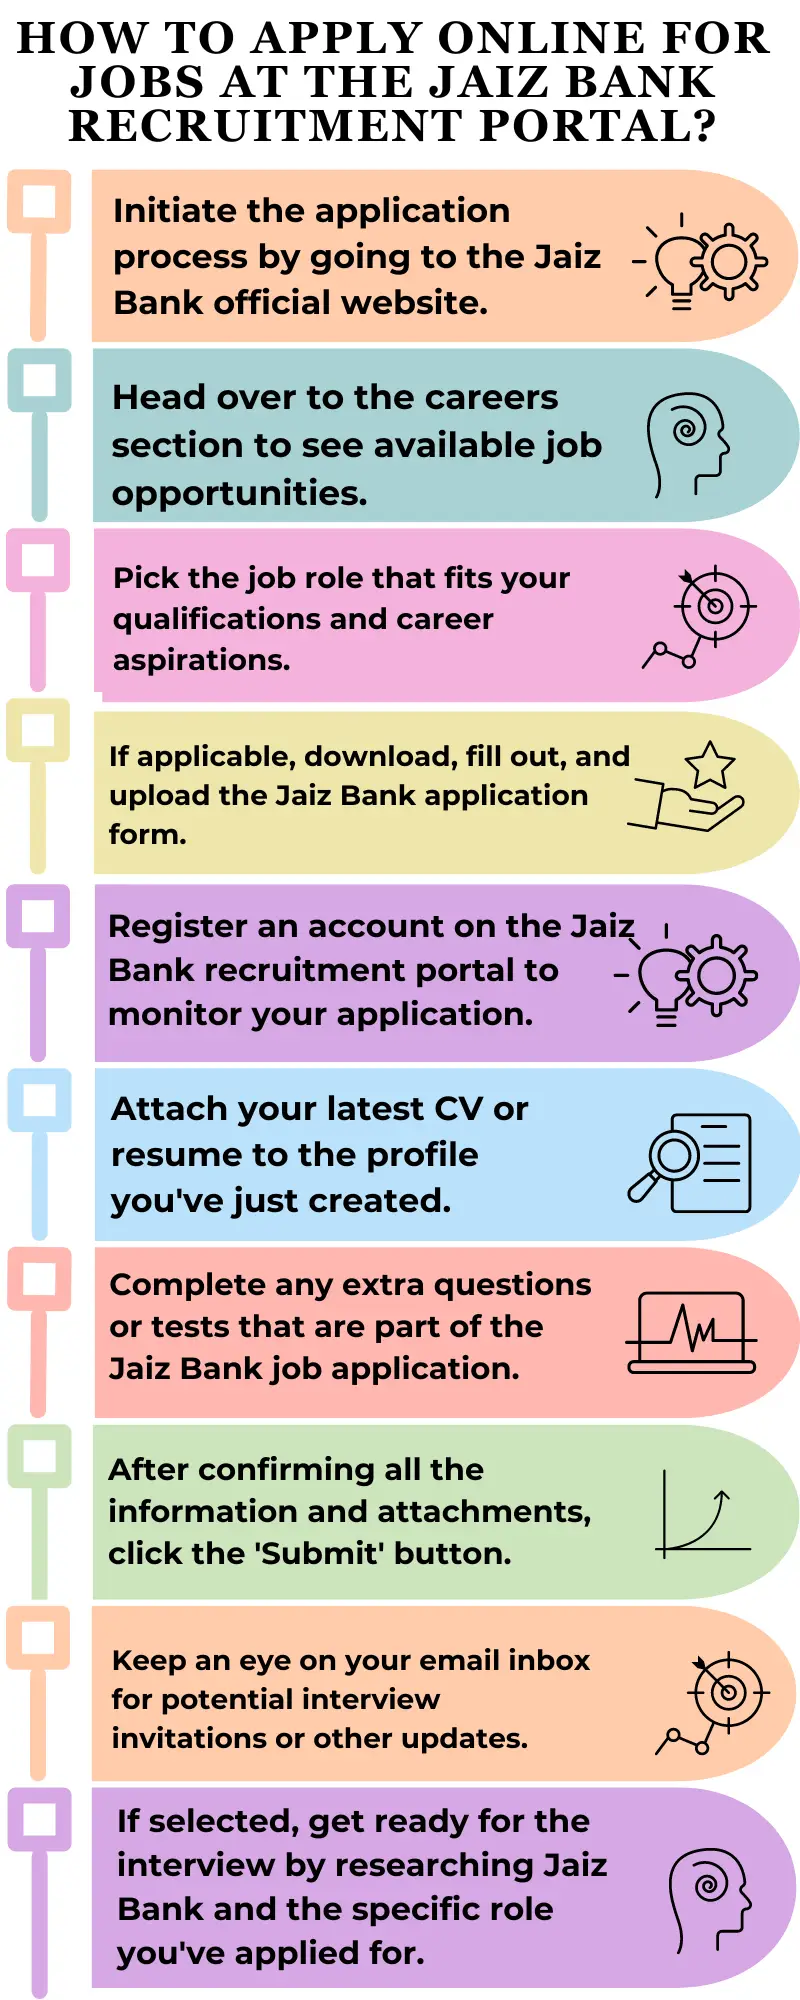 How to Apply Online for Jobs at the Jaiz Bank Recruitment Portal?